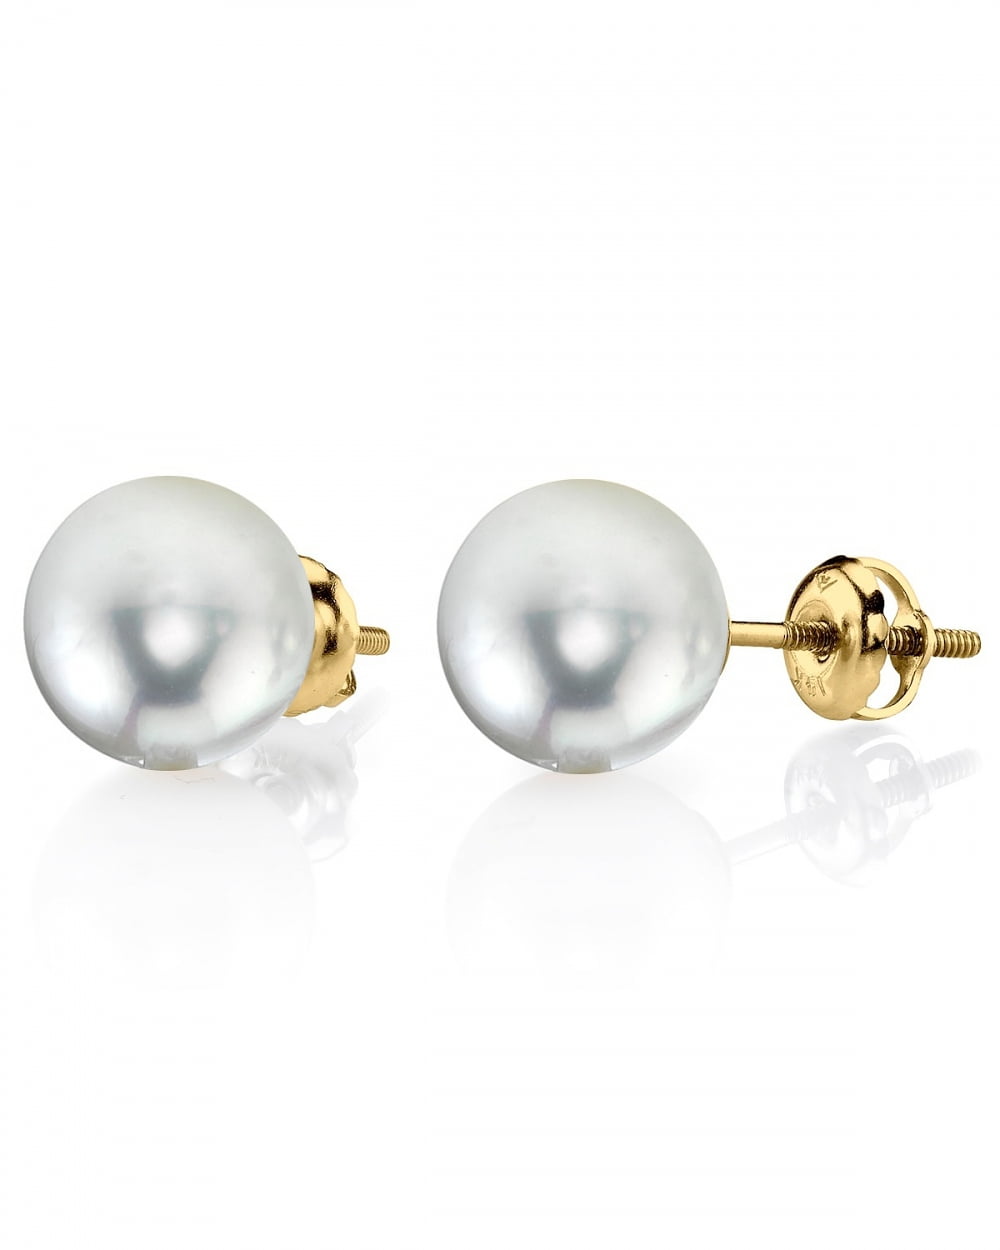 Earrings Cultured Pearls 0 5/16in White Gold 585 Pearl Earrings Studs 585er Gold 